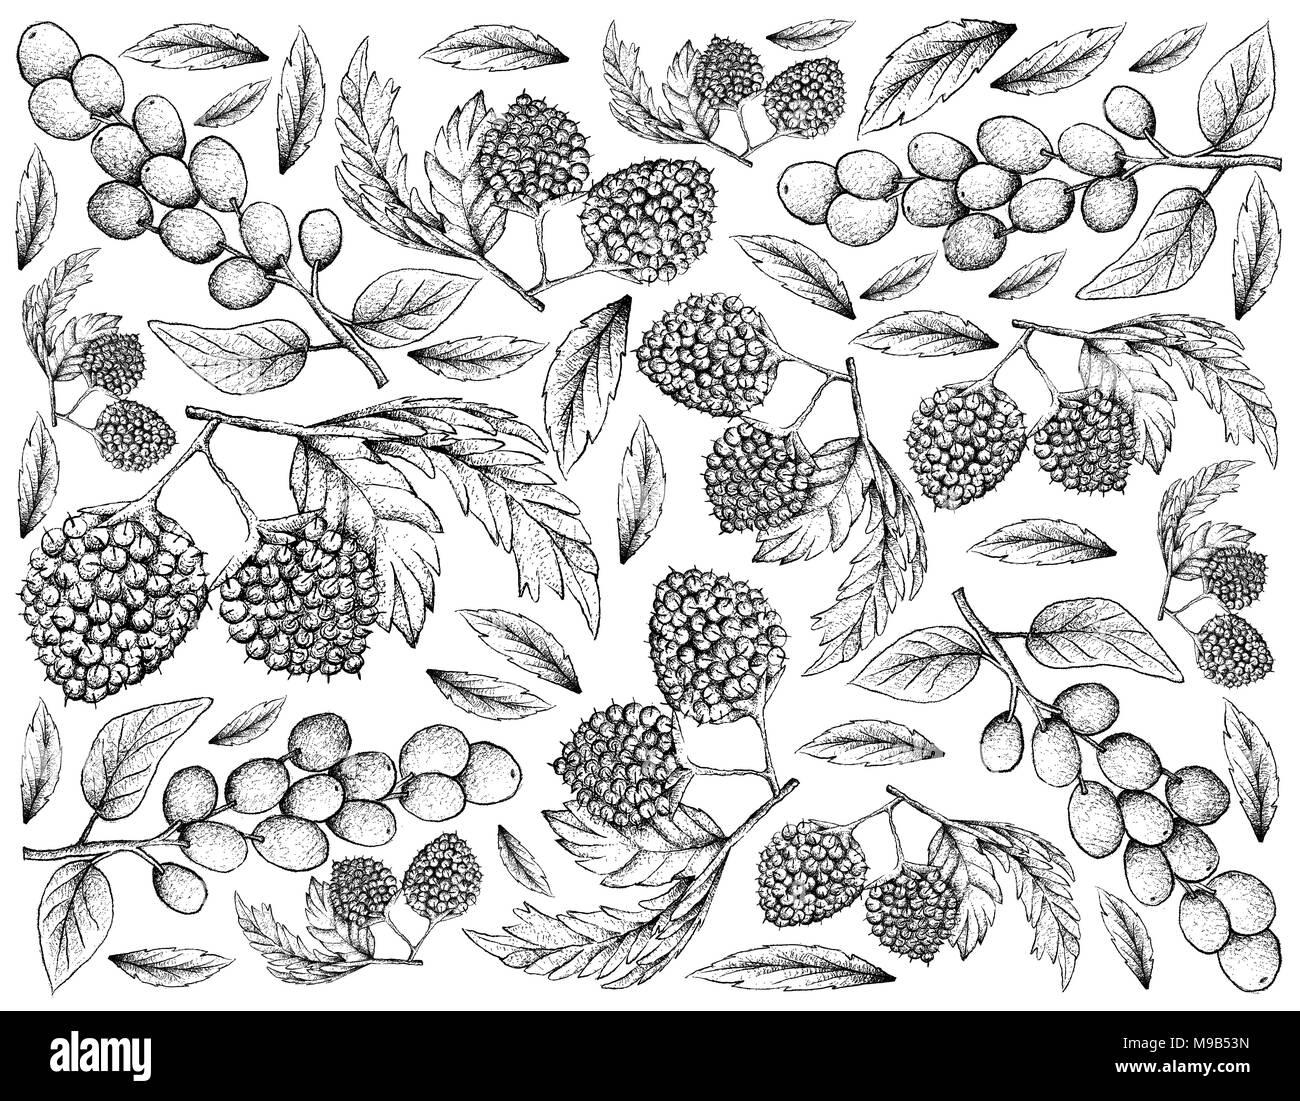 Berry Fruit, Illustration Wallpaper Background of Hand Drawn Sketch of Fresh Balloon Berries or Rubus Illecebrosus and Antidesma Ghaesembilla Fruits. Stock Photo